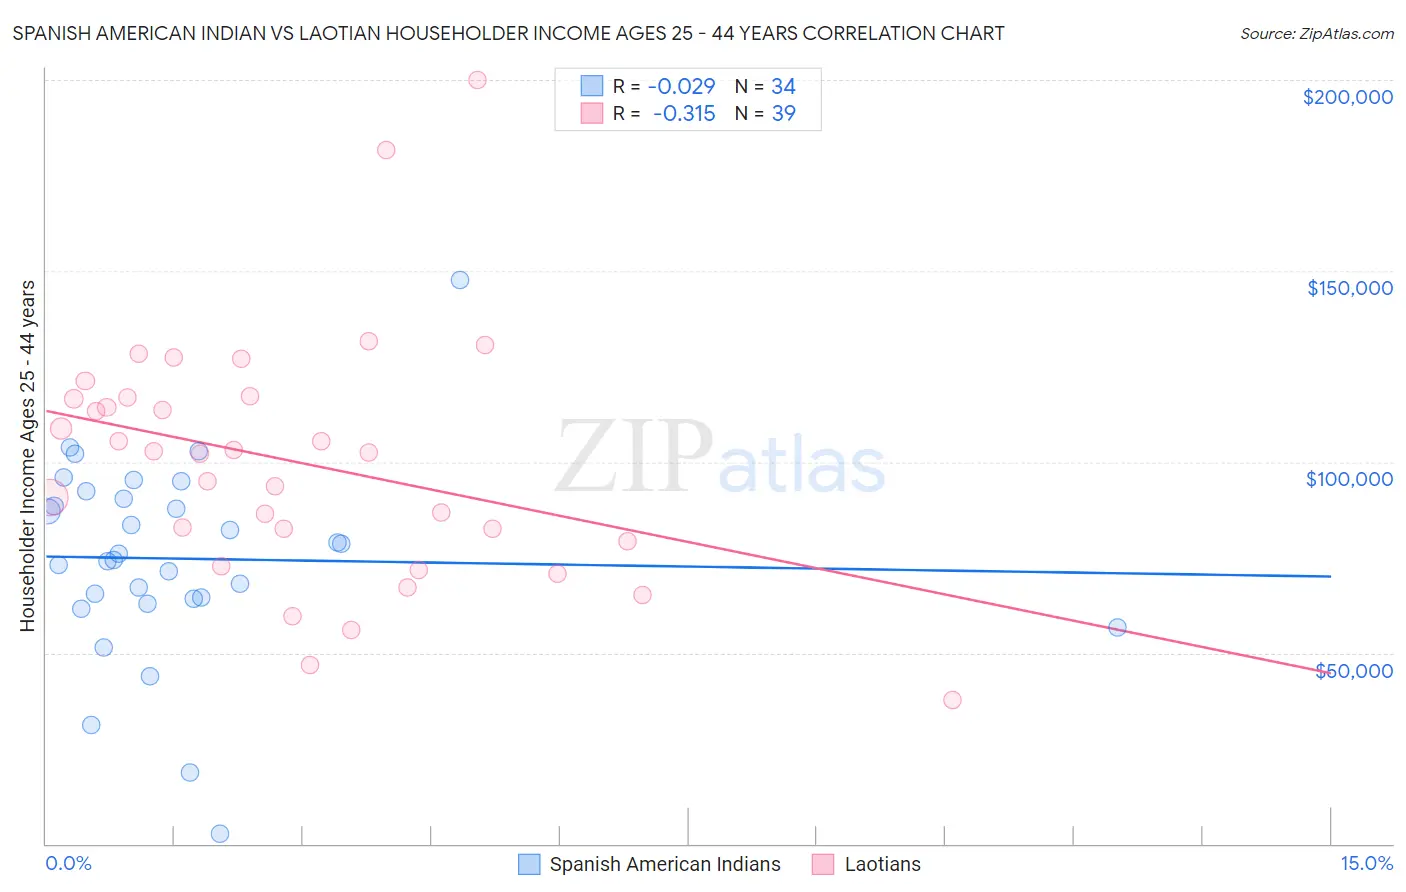 Spanish American Indian vs Laotian Householder Income Ages 25 - 44 years